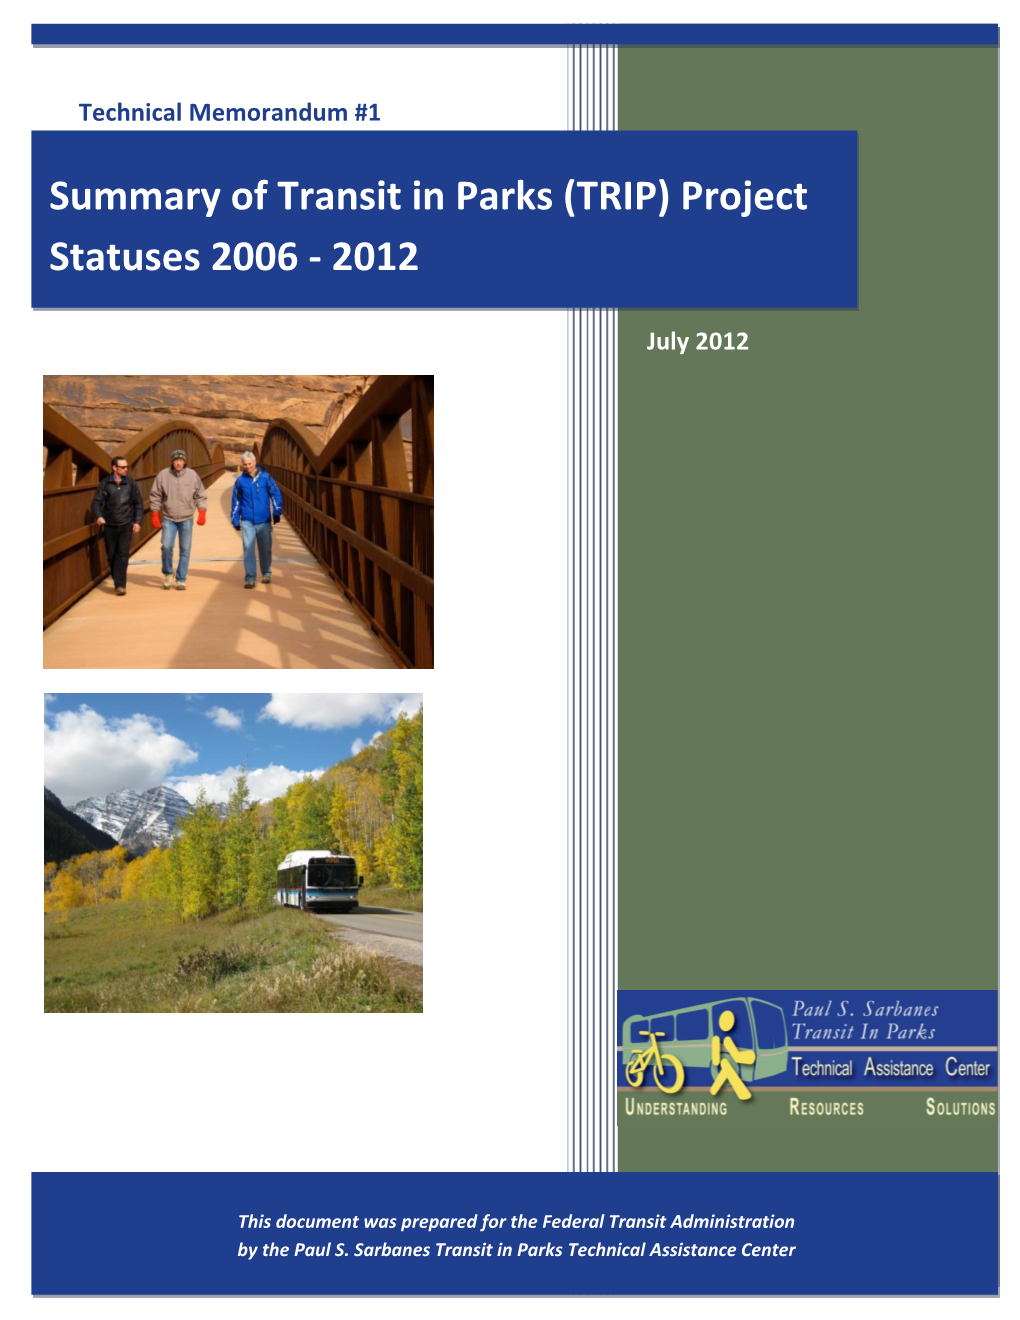 Summary of Transit in Parks (TRIP) Project